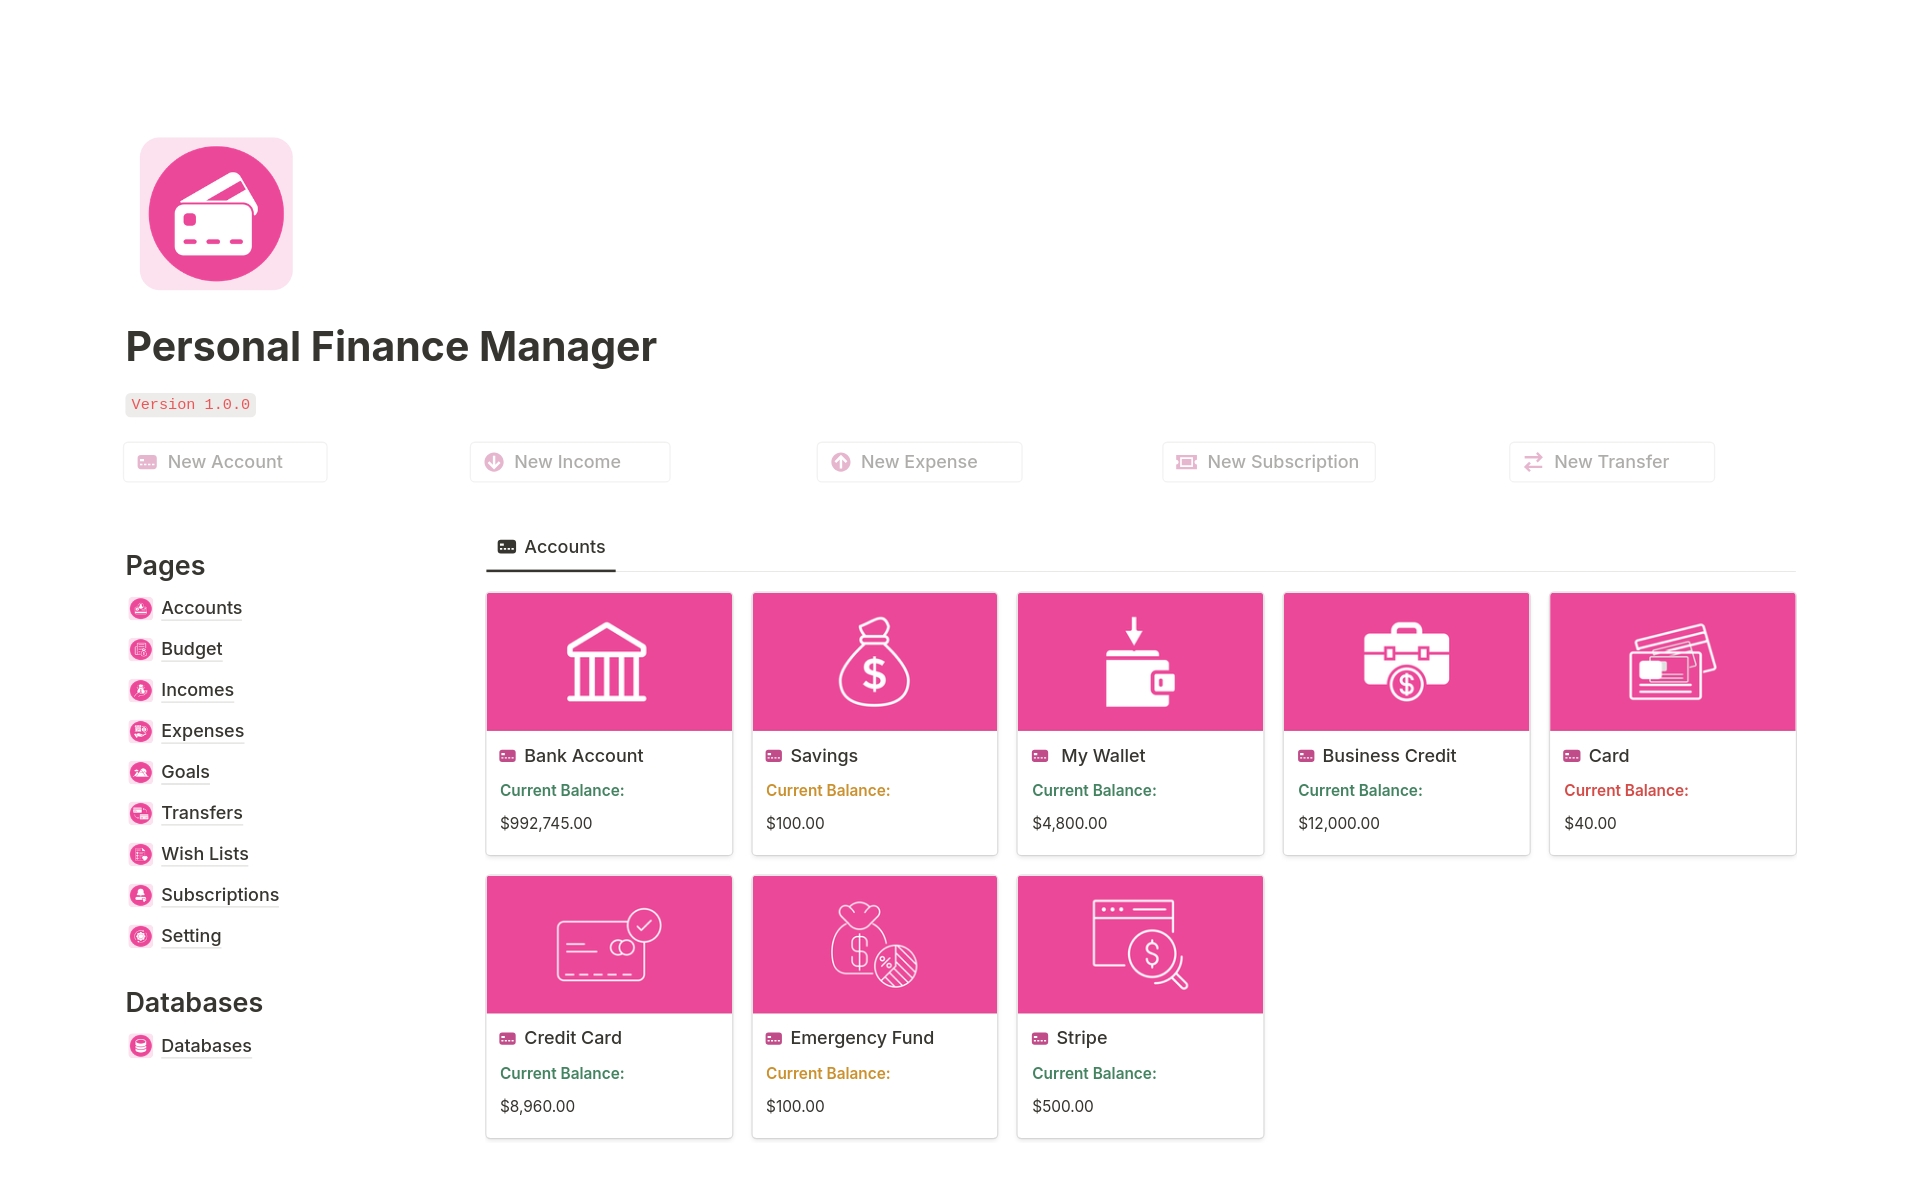 Effortlessly manage your finances with the Notion Personal Finance Manager, featuring seamless income tracking, expense management, subscription oversight, monthly budget planning, wish list organization, and financial goals tracking.